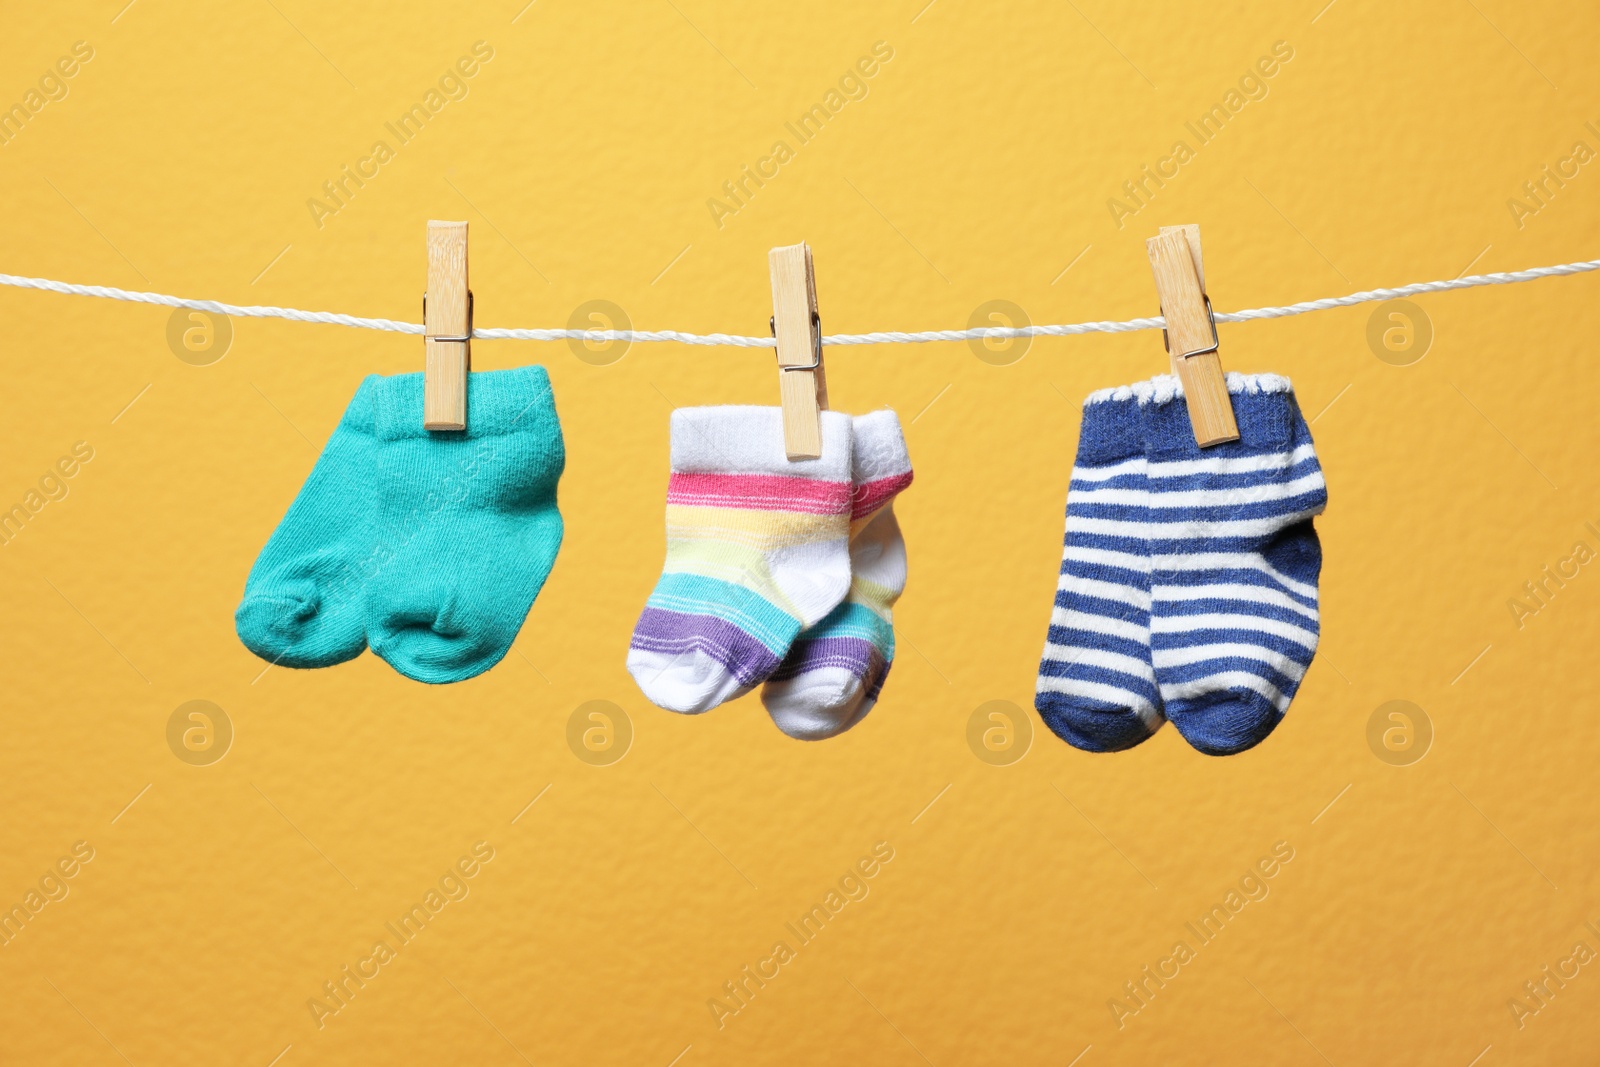 Photo of Different socks for baby on laundry line against color background